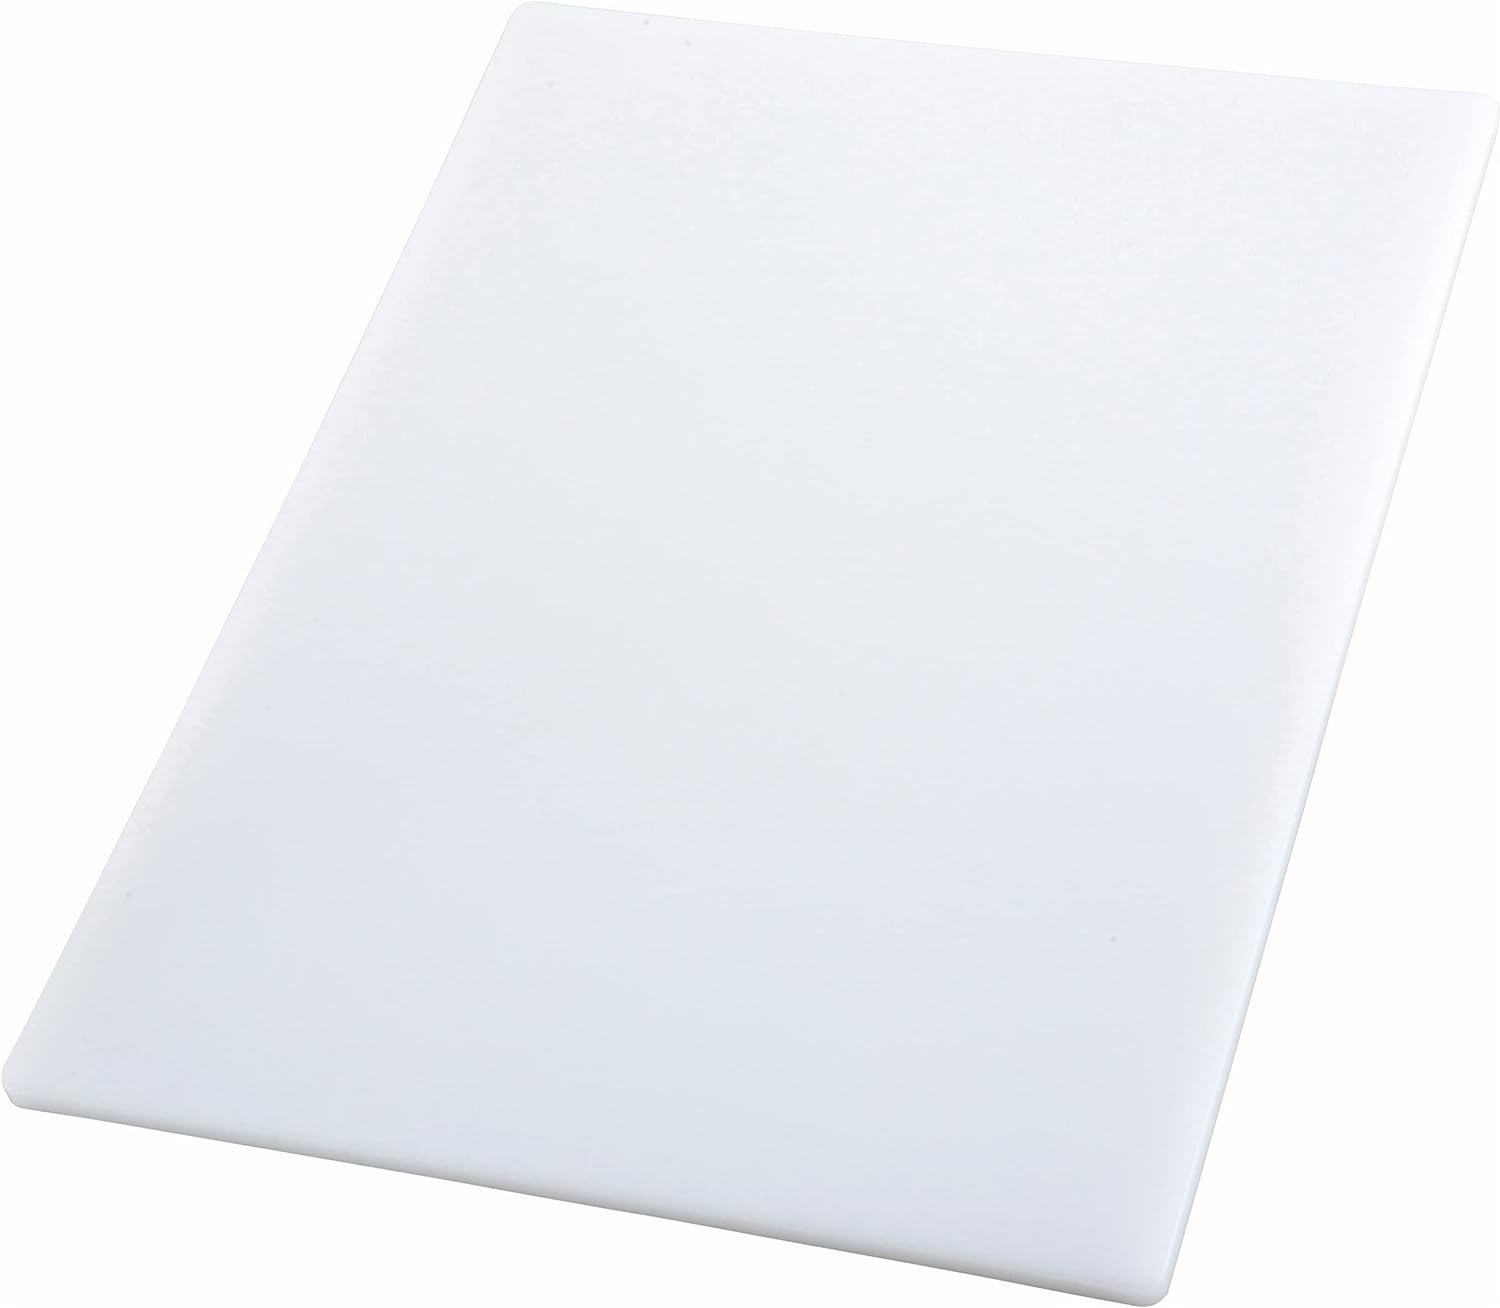 Winco CBWT-1218 Cutting Board, 12 by 18 by 1/2-Inch, White - $7.49